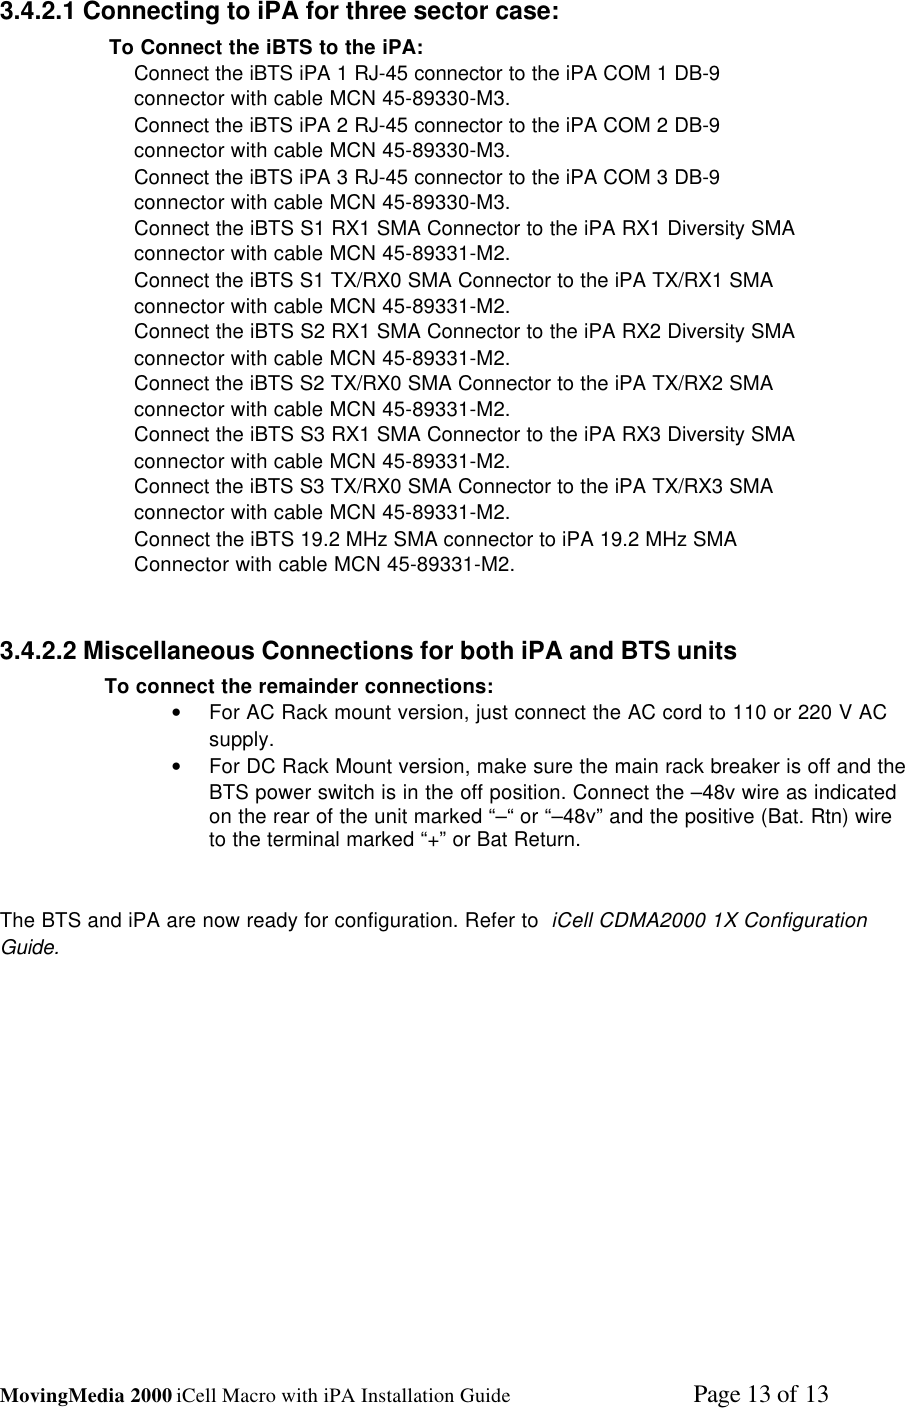 MovingMedia 2000 iCell Macro with iPA Installation Guide    Page 13 of 133.4.2.1 Connecting to iPA for three sector case: To Connect the iBTS to the iPA:Connect the iBTS iPA 1 RJ-45 connector to the iPA COM 1 DB-9connector with cable MCN 45-89330-M3.Connect the iBTS iPA 2 RJ-45 connector to the iPA COM 2 DB-9connector with cable MCN 45-89330-M3.Connect the iBTS iPA 3 RJ-45 connector to the iPA COM 3 DB-9connector with cable MCN 45-89330-M3.Connect the iBTS S1 RX1 SMA Connector to the iPA RX1 Diversity SMAconnector with cable MCN 45-89331-M2.Connect the iBTS S1 TX/RX0 SMA Connector to the iPA TX/RX1 SMAconnector with cable MCN 45-89331-M2.Connect the iBTS S2 RX1 SMA Connector to the iPA RX2 Diversity SMAconnector with cable MCN 45-89331-M2.Connect the iBTS S2 TX/RX0 SMA Connector to the iPA TX/RX2 SMAconnector with cable MCN 45-89331-M2.Connect the iBTS S3 RX1 SMA Connector to the iPA RX3 Diversity SMAconnector with cable MCN 45-89331-M2.Connect the iBTS S3 TX/RX0 SMA Connector to the iPA TX/RX3 SMAconnector with cable MCN 45-89331-M2.Connect the iBTS 19.2 MHz SMA connector to iPA 19.2 MHz SMAConnector with cable MCN 45-89331-M2.3.4.2.2 Miscellaneous Connections for both iPA and BTS unitsTo connect the remainder connections:• For AC Rack mount version, just connect the AC cord to 110 or 220 V ACsupply.• For DC Rack Mount version, make sure the main rack breaker is off and theBTS power switch is in the off position. Connect the –48v wire as indicatedon the rear of the unit marked “–“ or “–48v” and the positive (Bat. Rtn) wireto the terminal marked “+” or Bat Return.The BTS and iPA are now ready for configuration. Refer to  iCell CDMA2000 1X ConfigurationGuide.